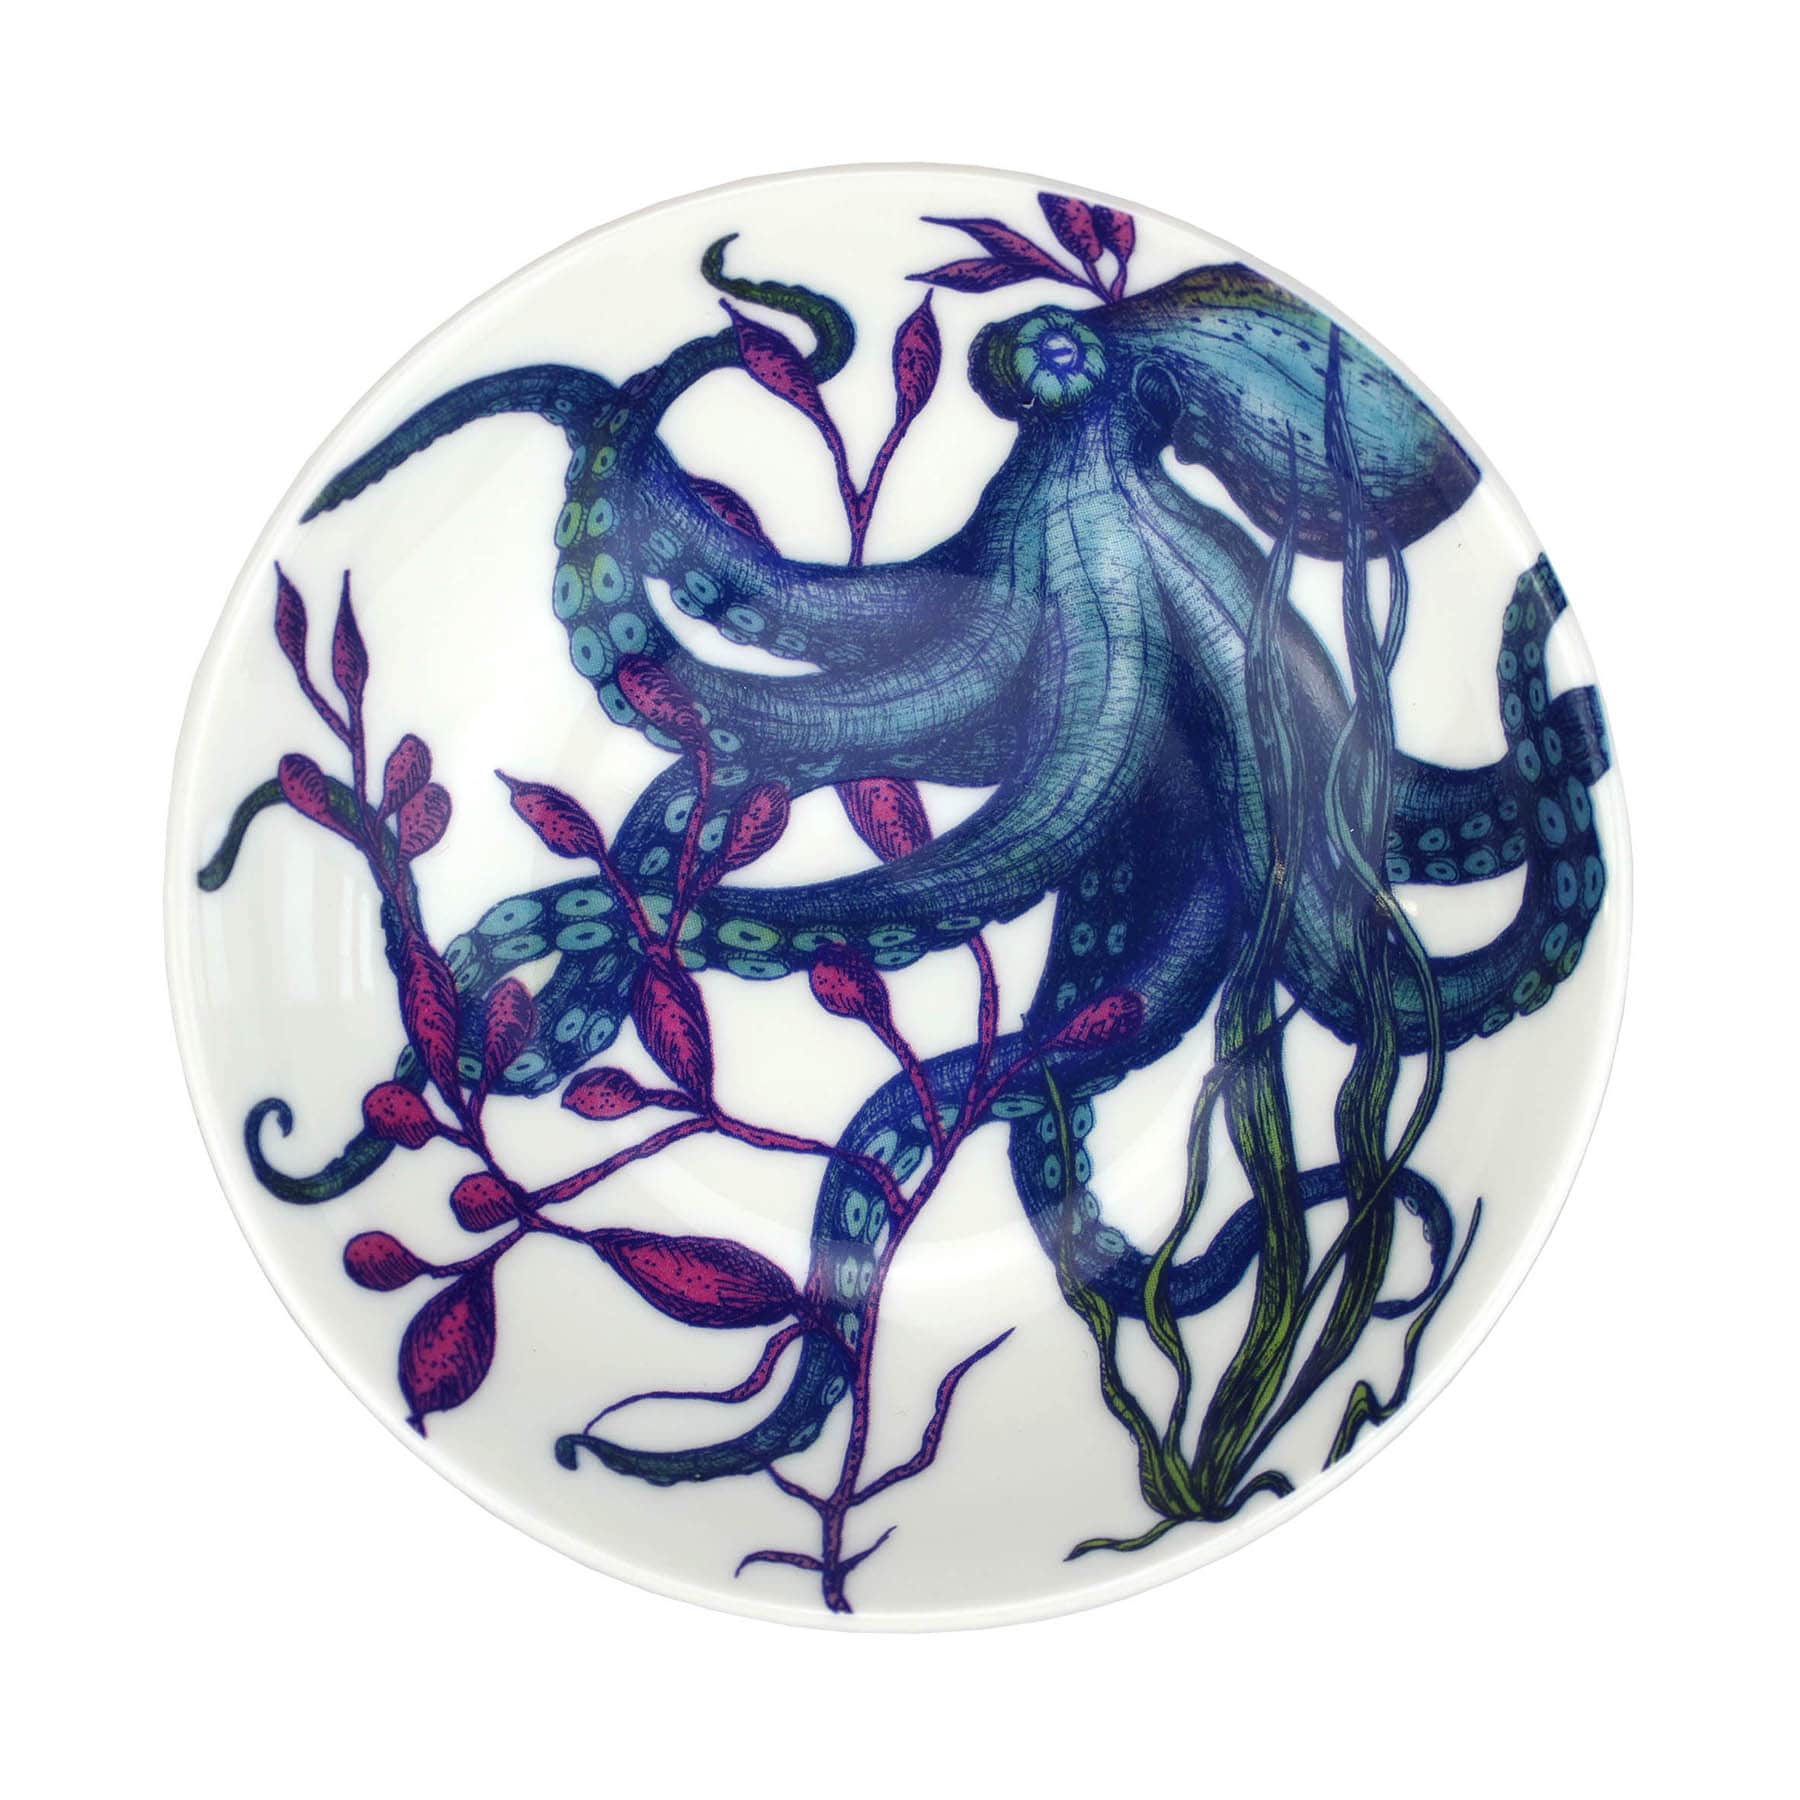 Nibbles bowl in Bone China in our colourful Reef range in the Octopus design